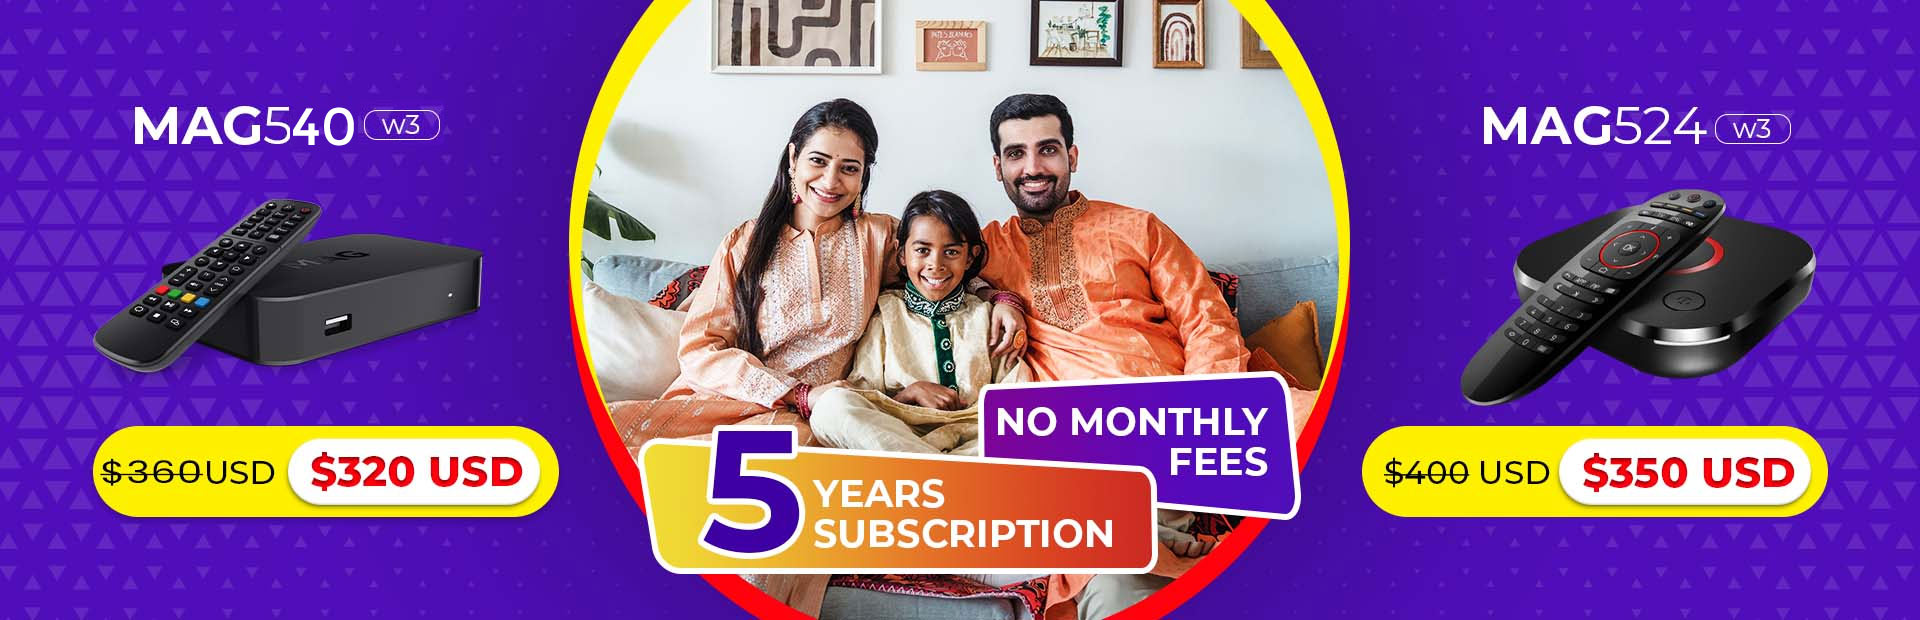 5 Year Subscription